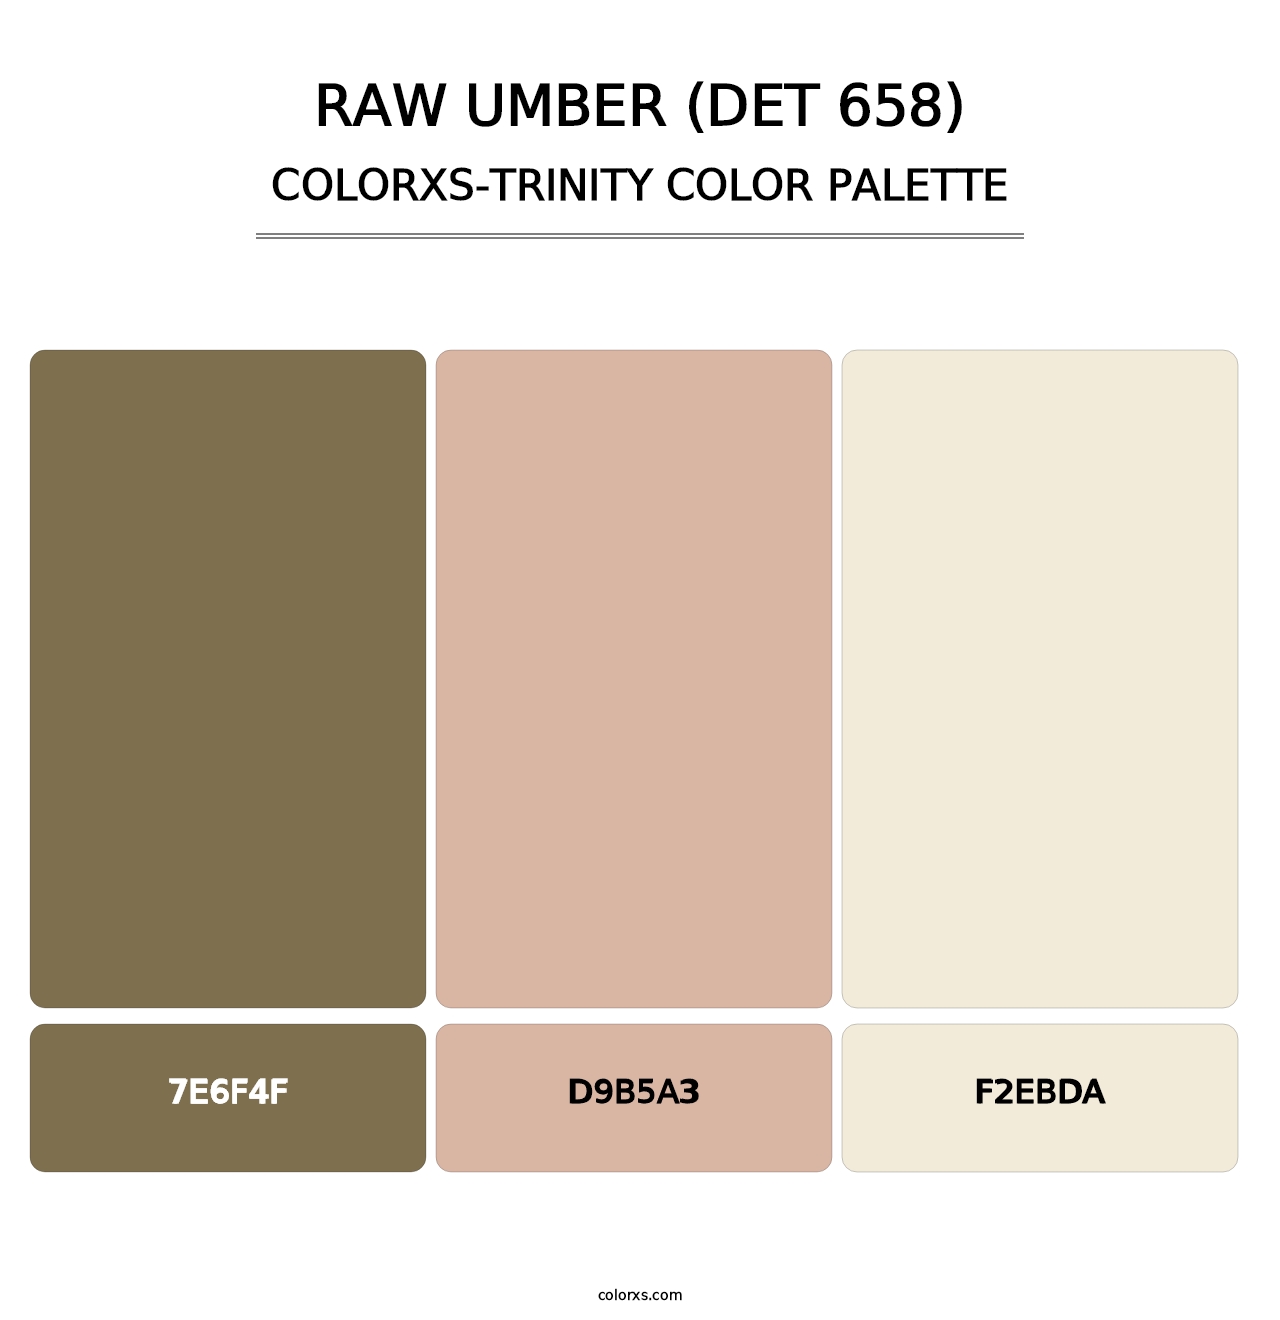 Raw Umber (DET 658) - Colorxs Trinity Palette